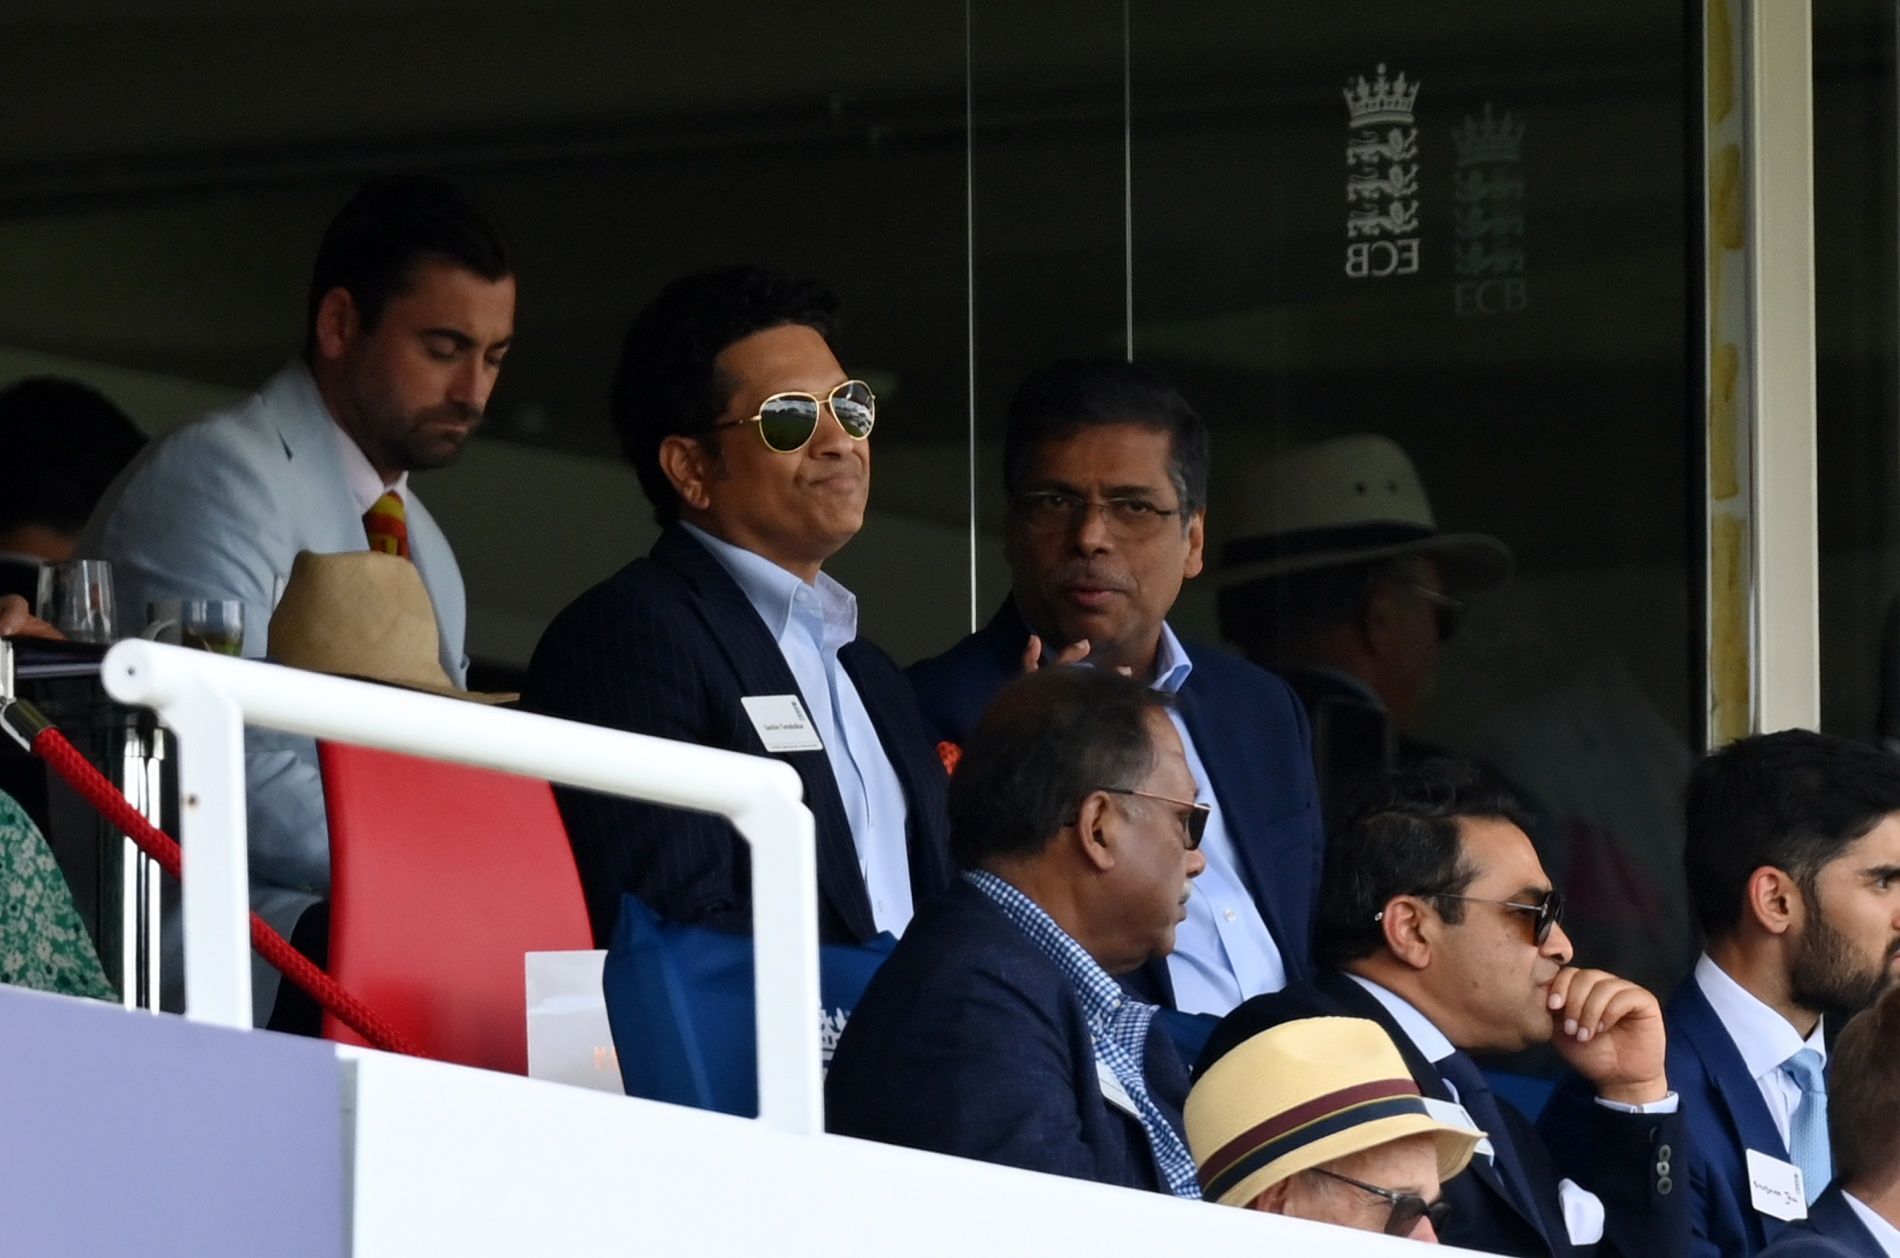 Sachin Tendulkar at Lord&rsquo;s. Pic: Lord&#039;s Cricket Ground/ Twitter